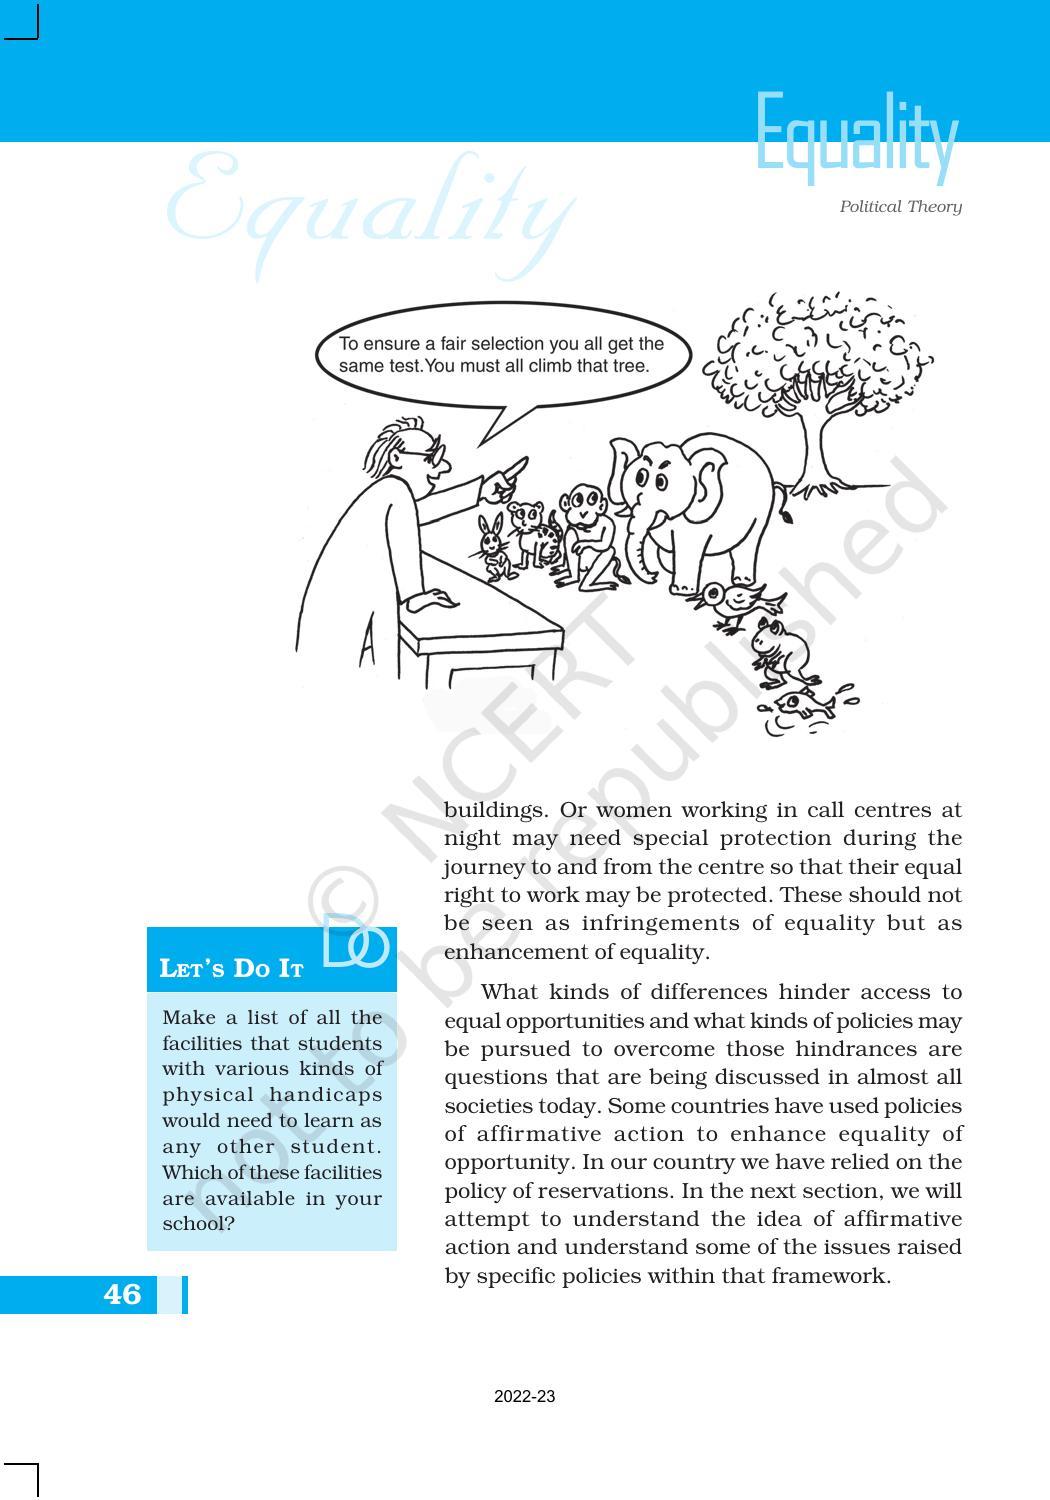 NCERT Book for Class 11 Political Science (Political Theory) Chapter 3 Equality - Page 16